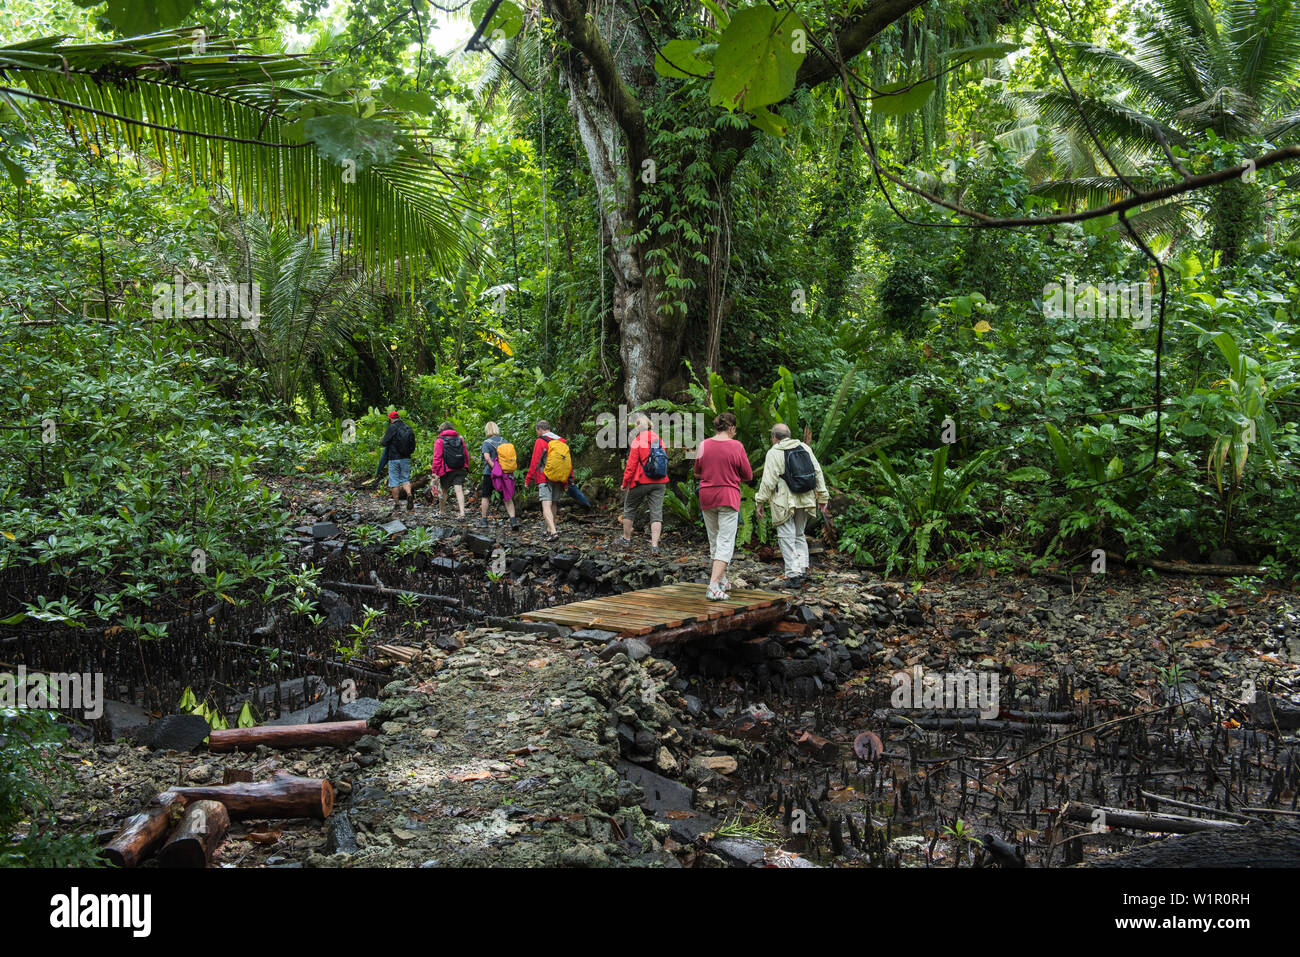 Tourists on an excursion cross a wooden bridge to enter a lush tropical forest, Pohnpei Island, Pohnpei, Federated States of Micronesia, South Pacific Stock Photo